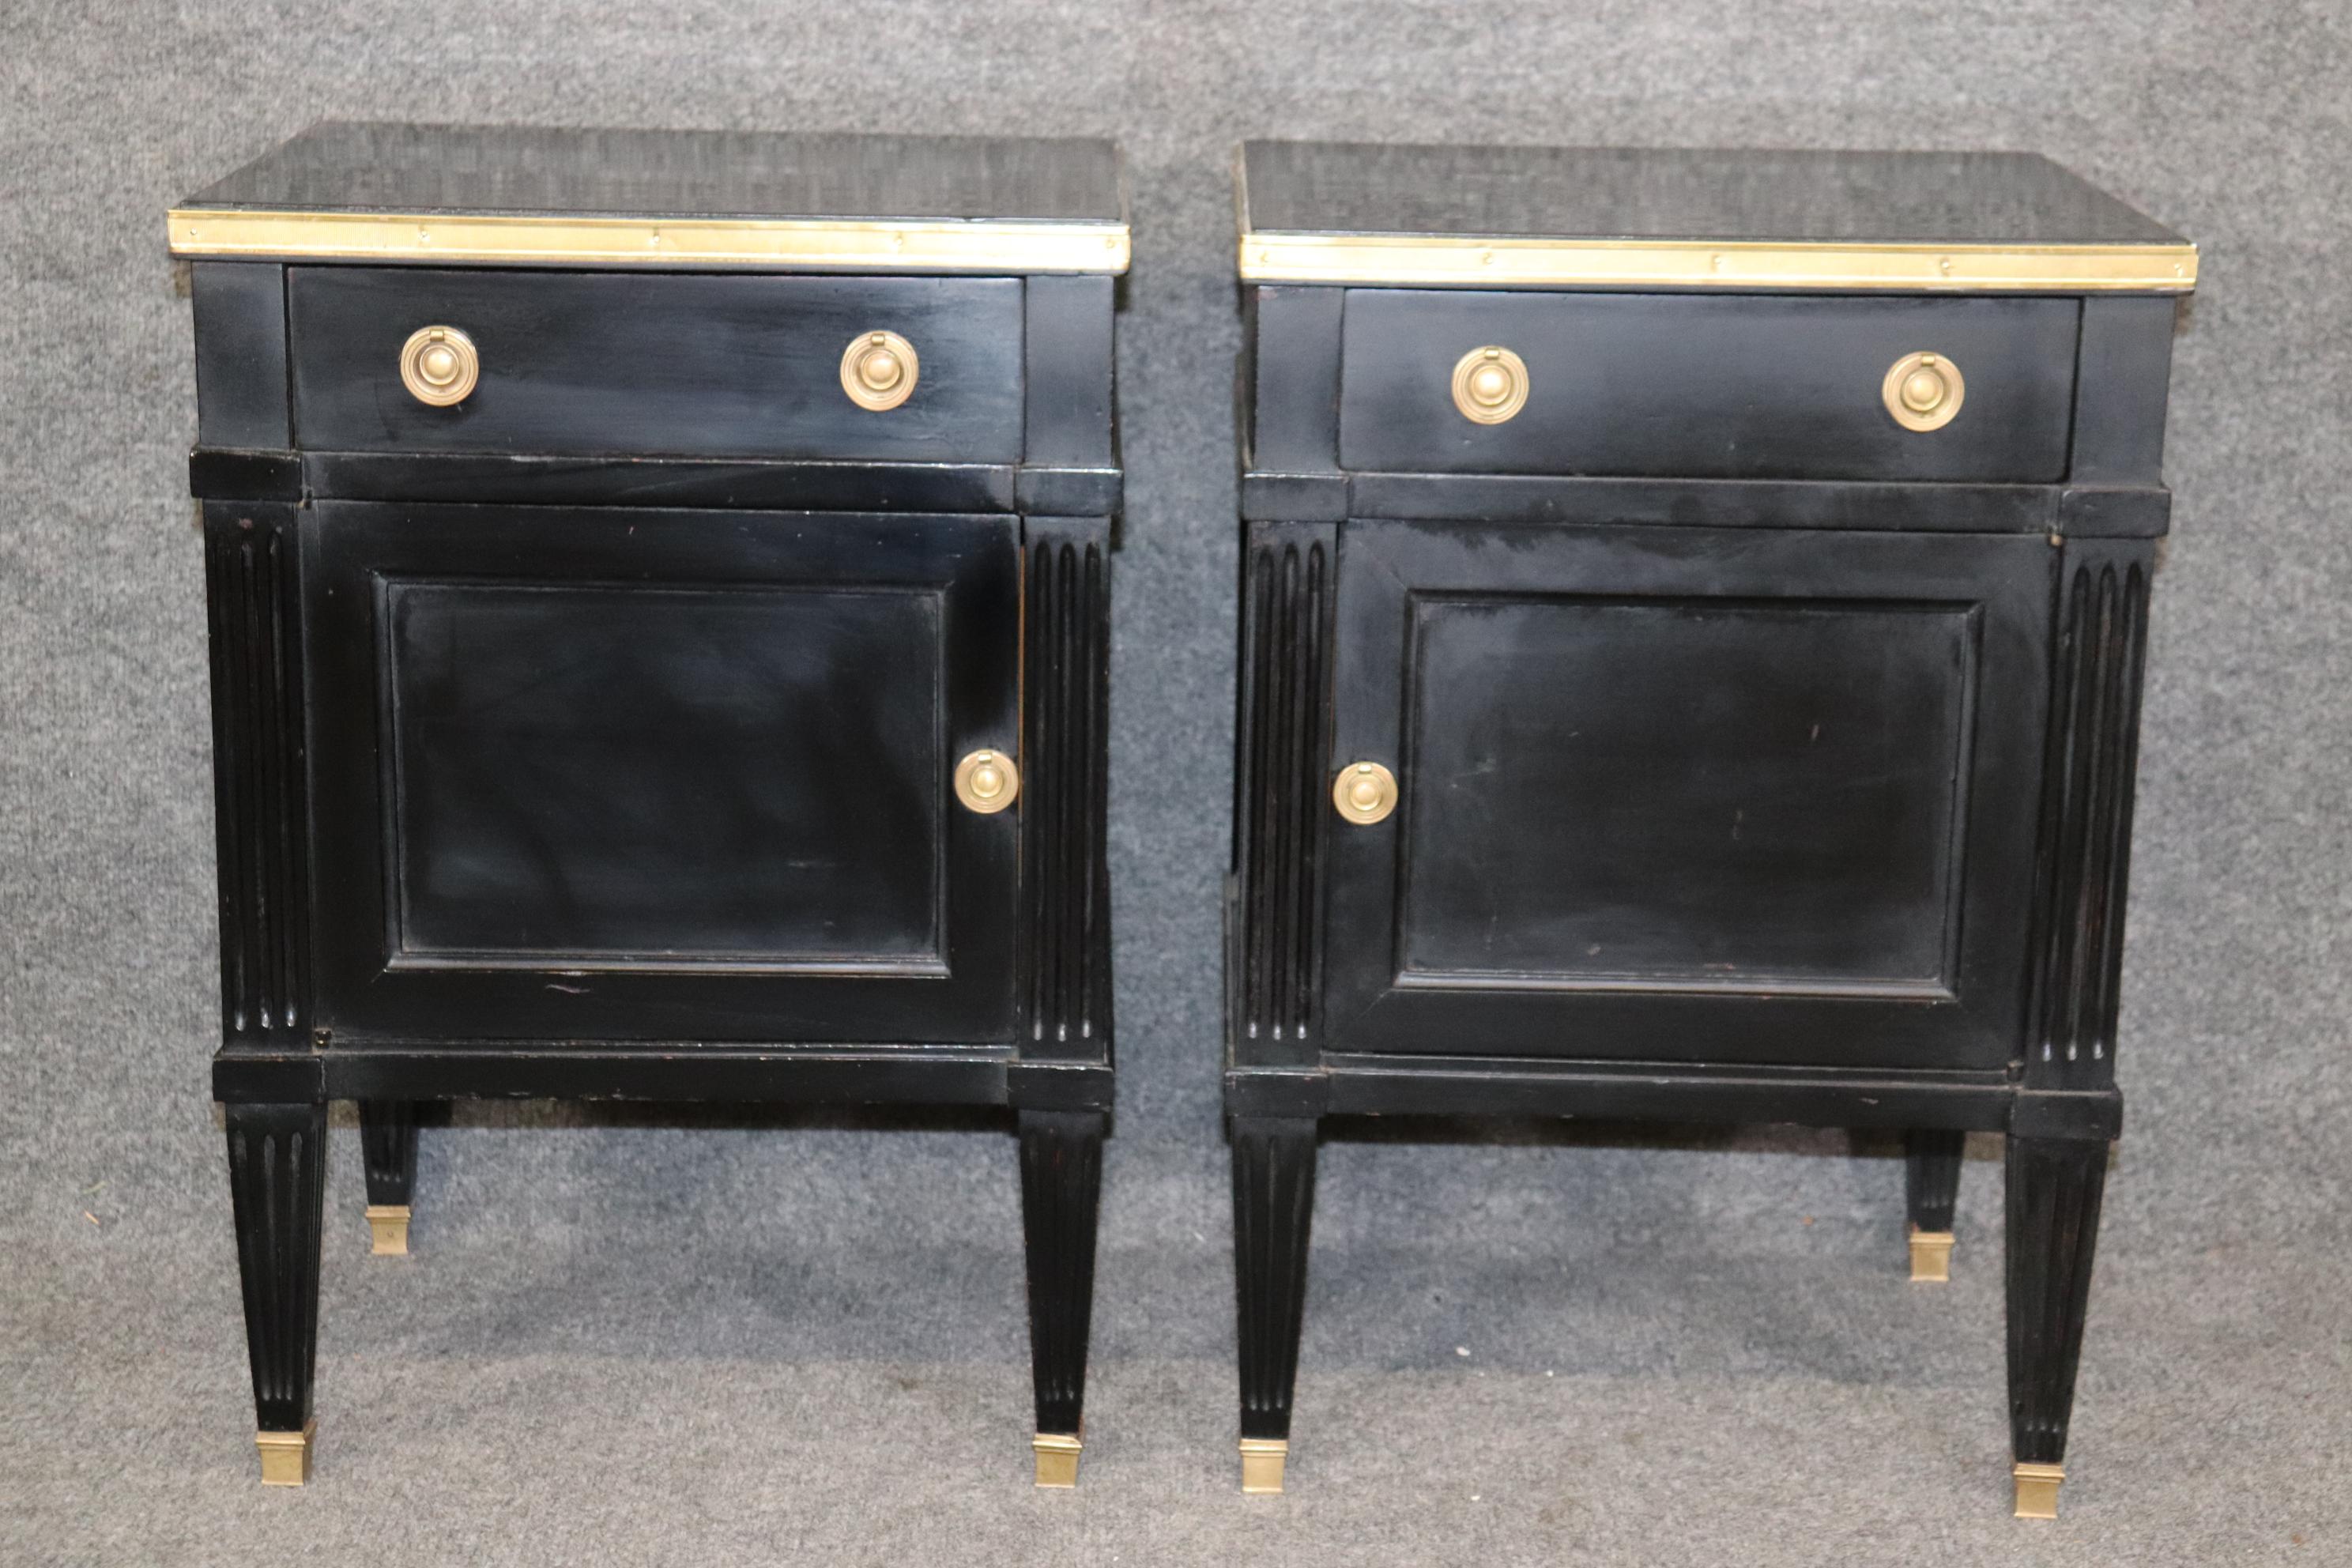 Dimensions- H: 33in W: 61 1/4in D: 17 1/2in
This Pair of Louis XVI Directoire Style Ebonized Nightstands Signed By Maison Jansen Circa 1950 are truly exceptional and are super rare!  If you look at the photos provided you will see the black